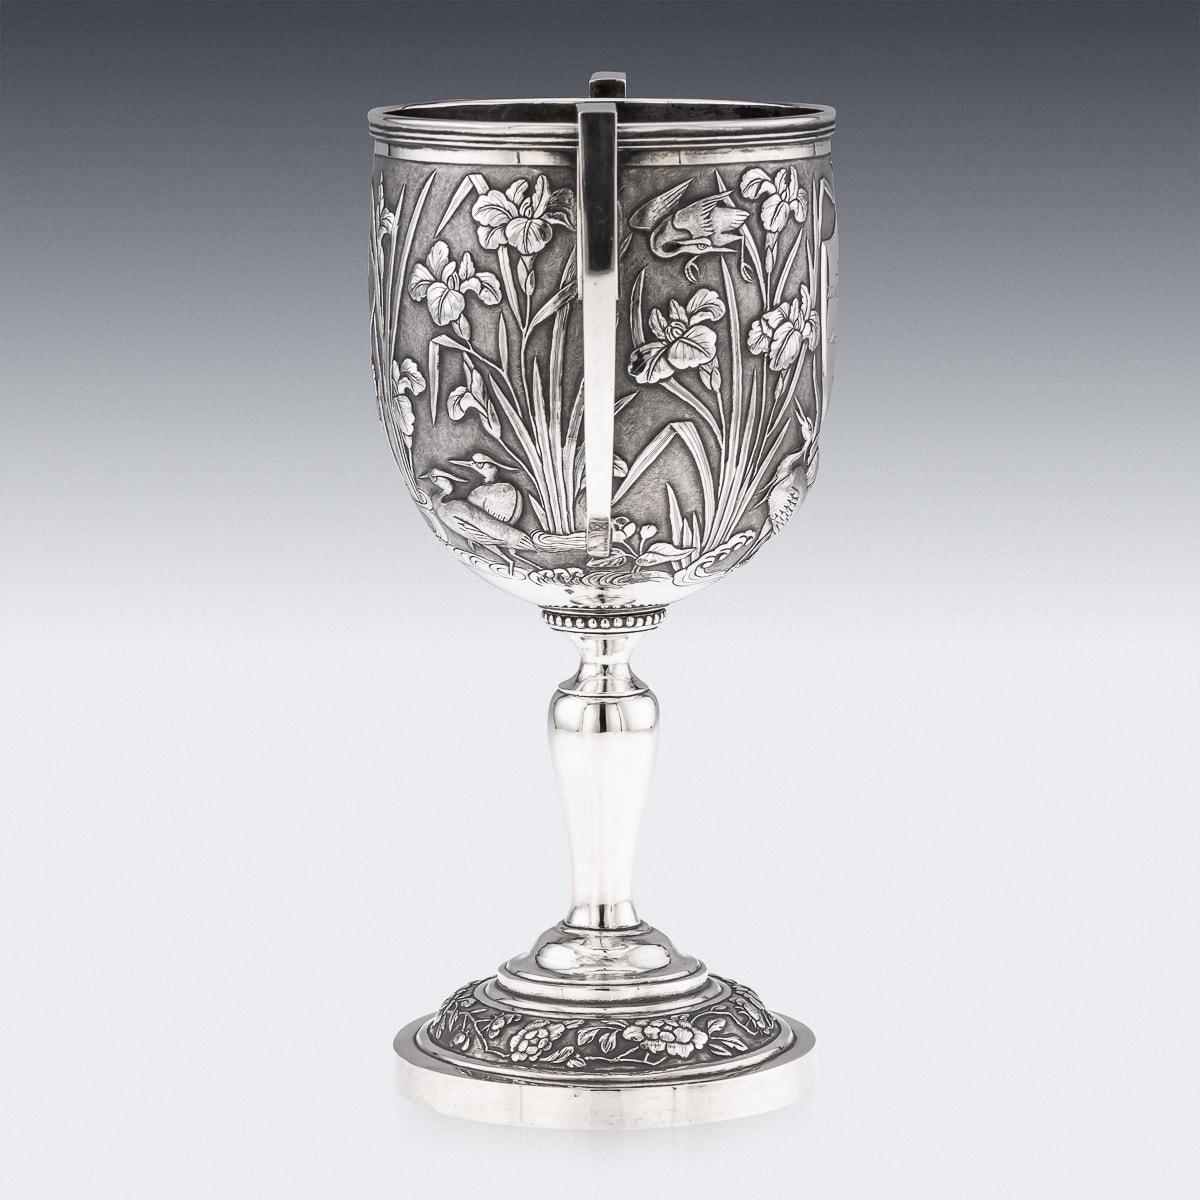 20th Century Chinese Export Solid Silver Trophy Cup, Woshing, Shanghai c.1900 For Sale 1